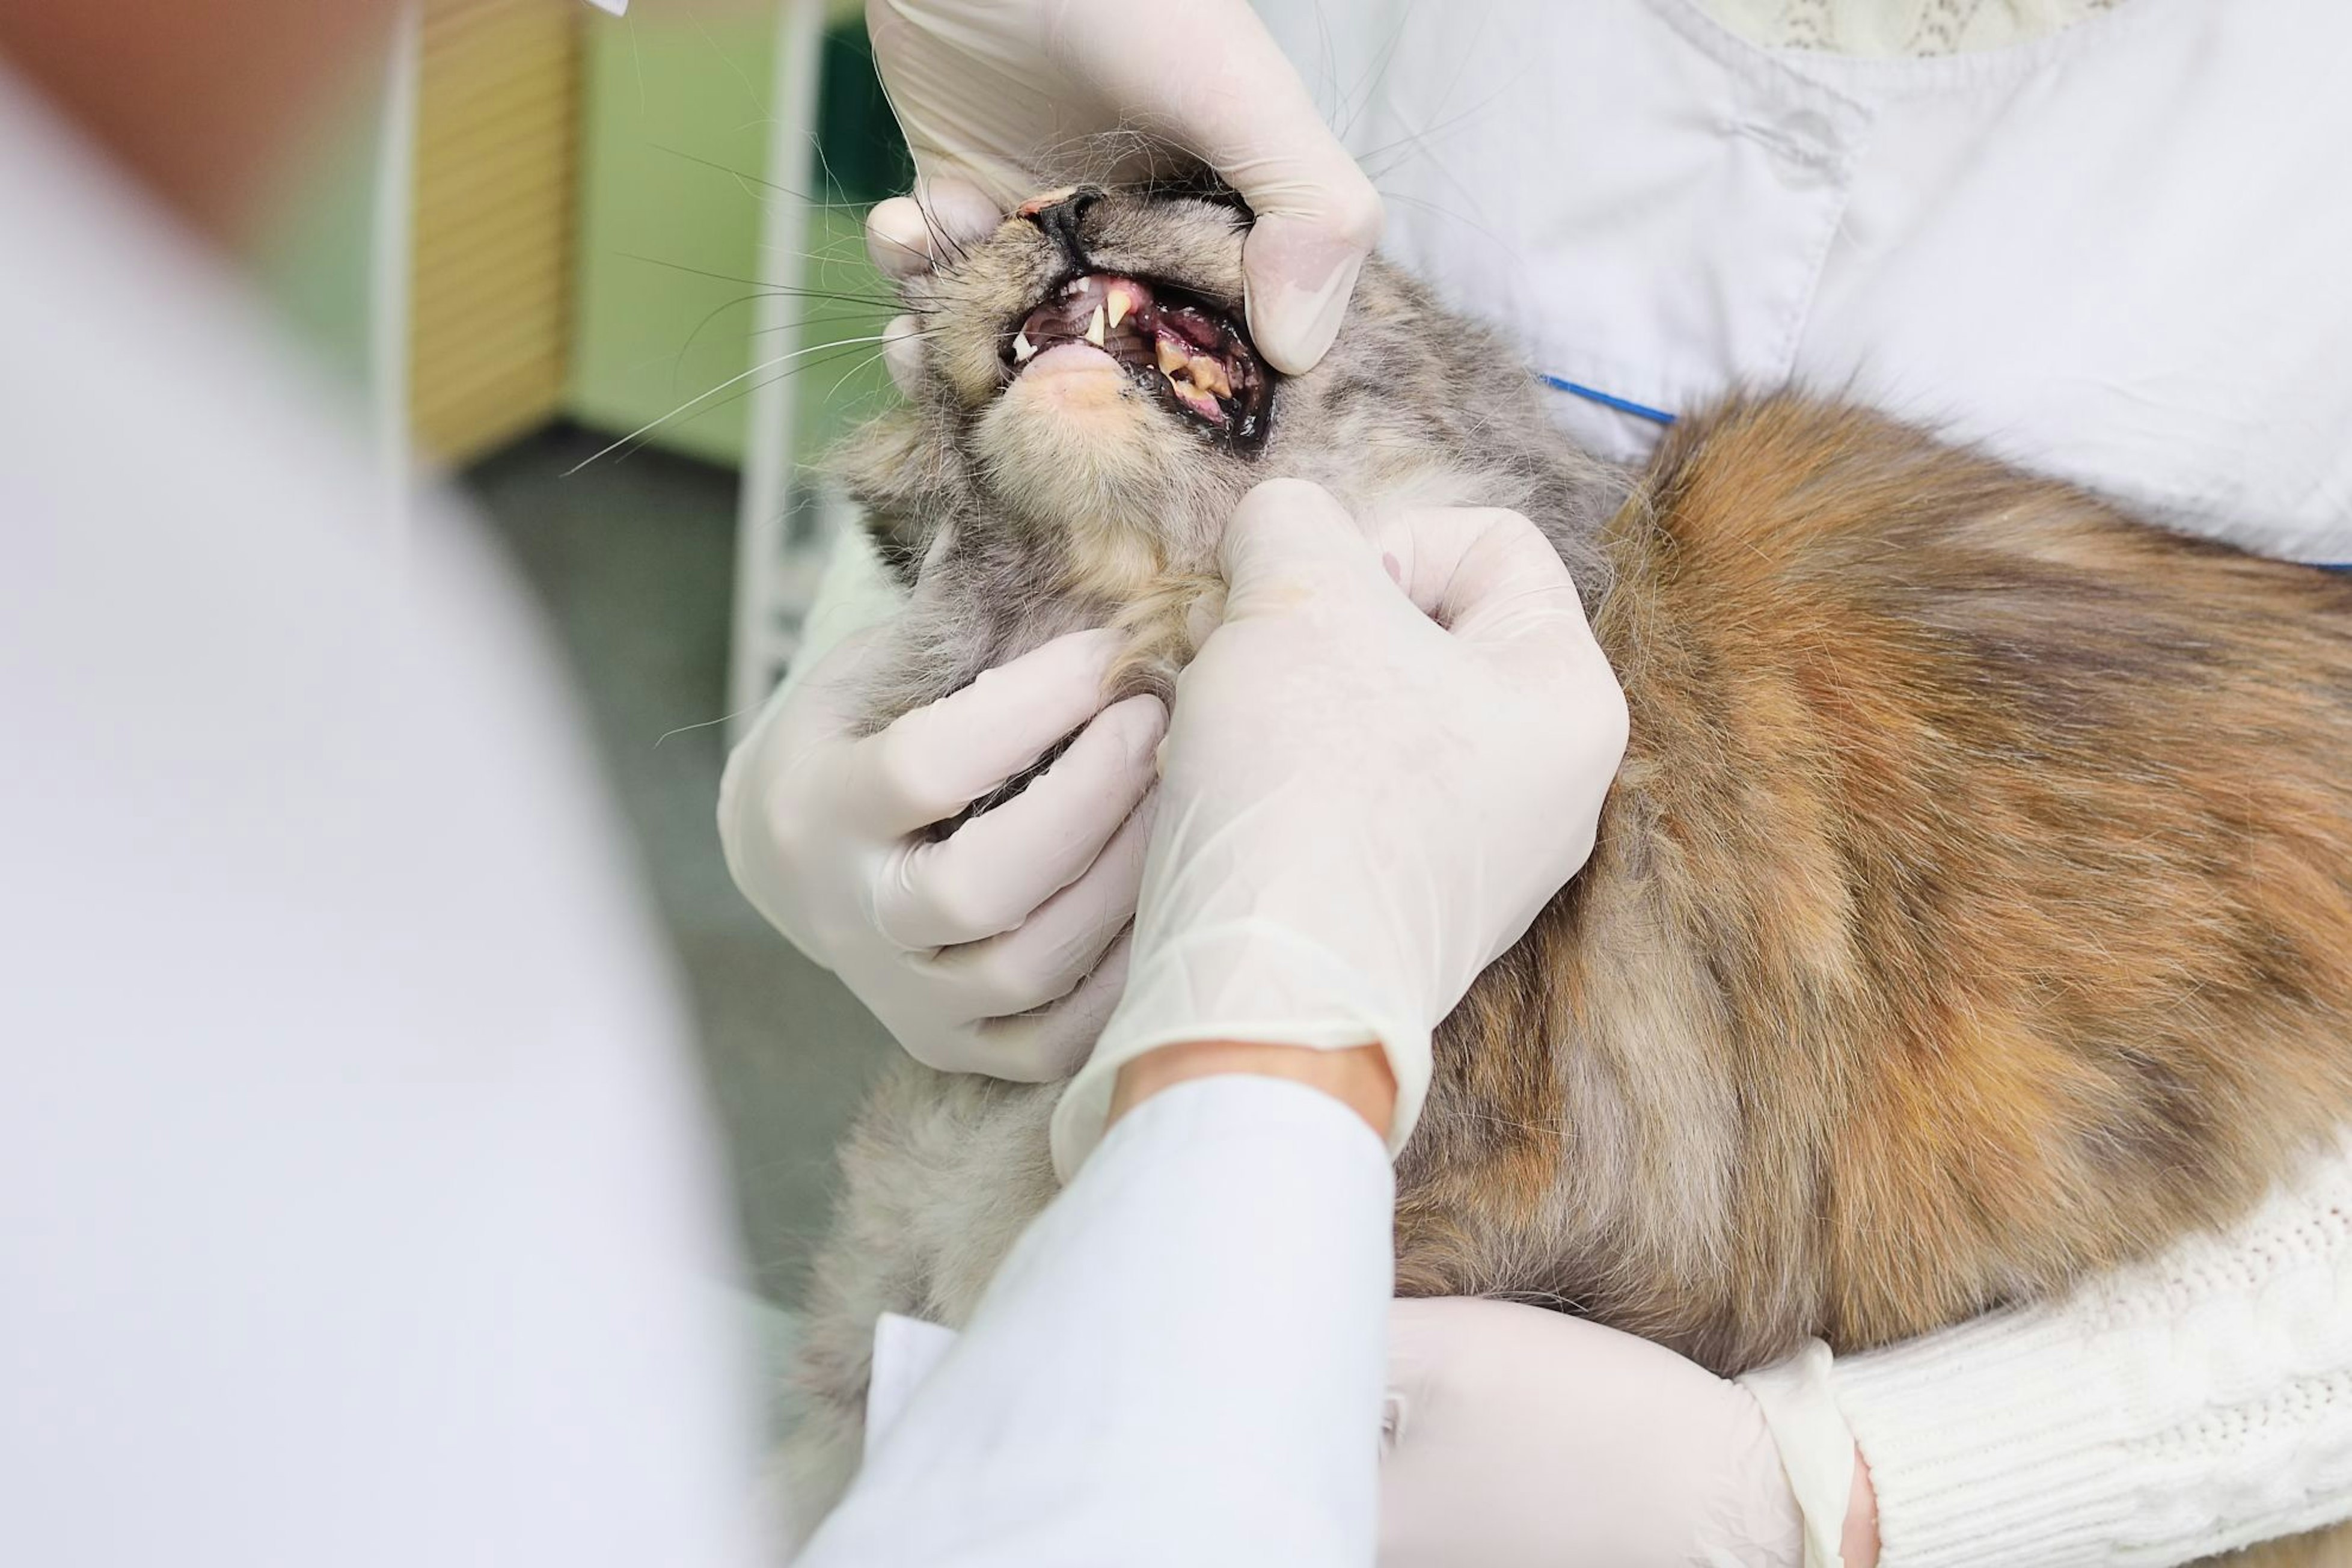 Epidemiology of periodontal disease in older cats